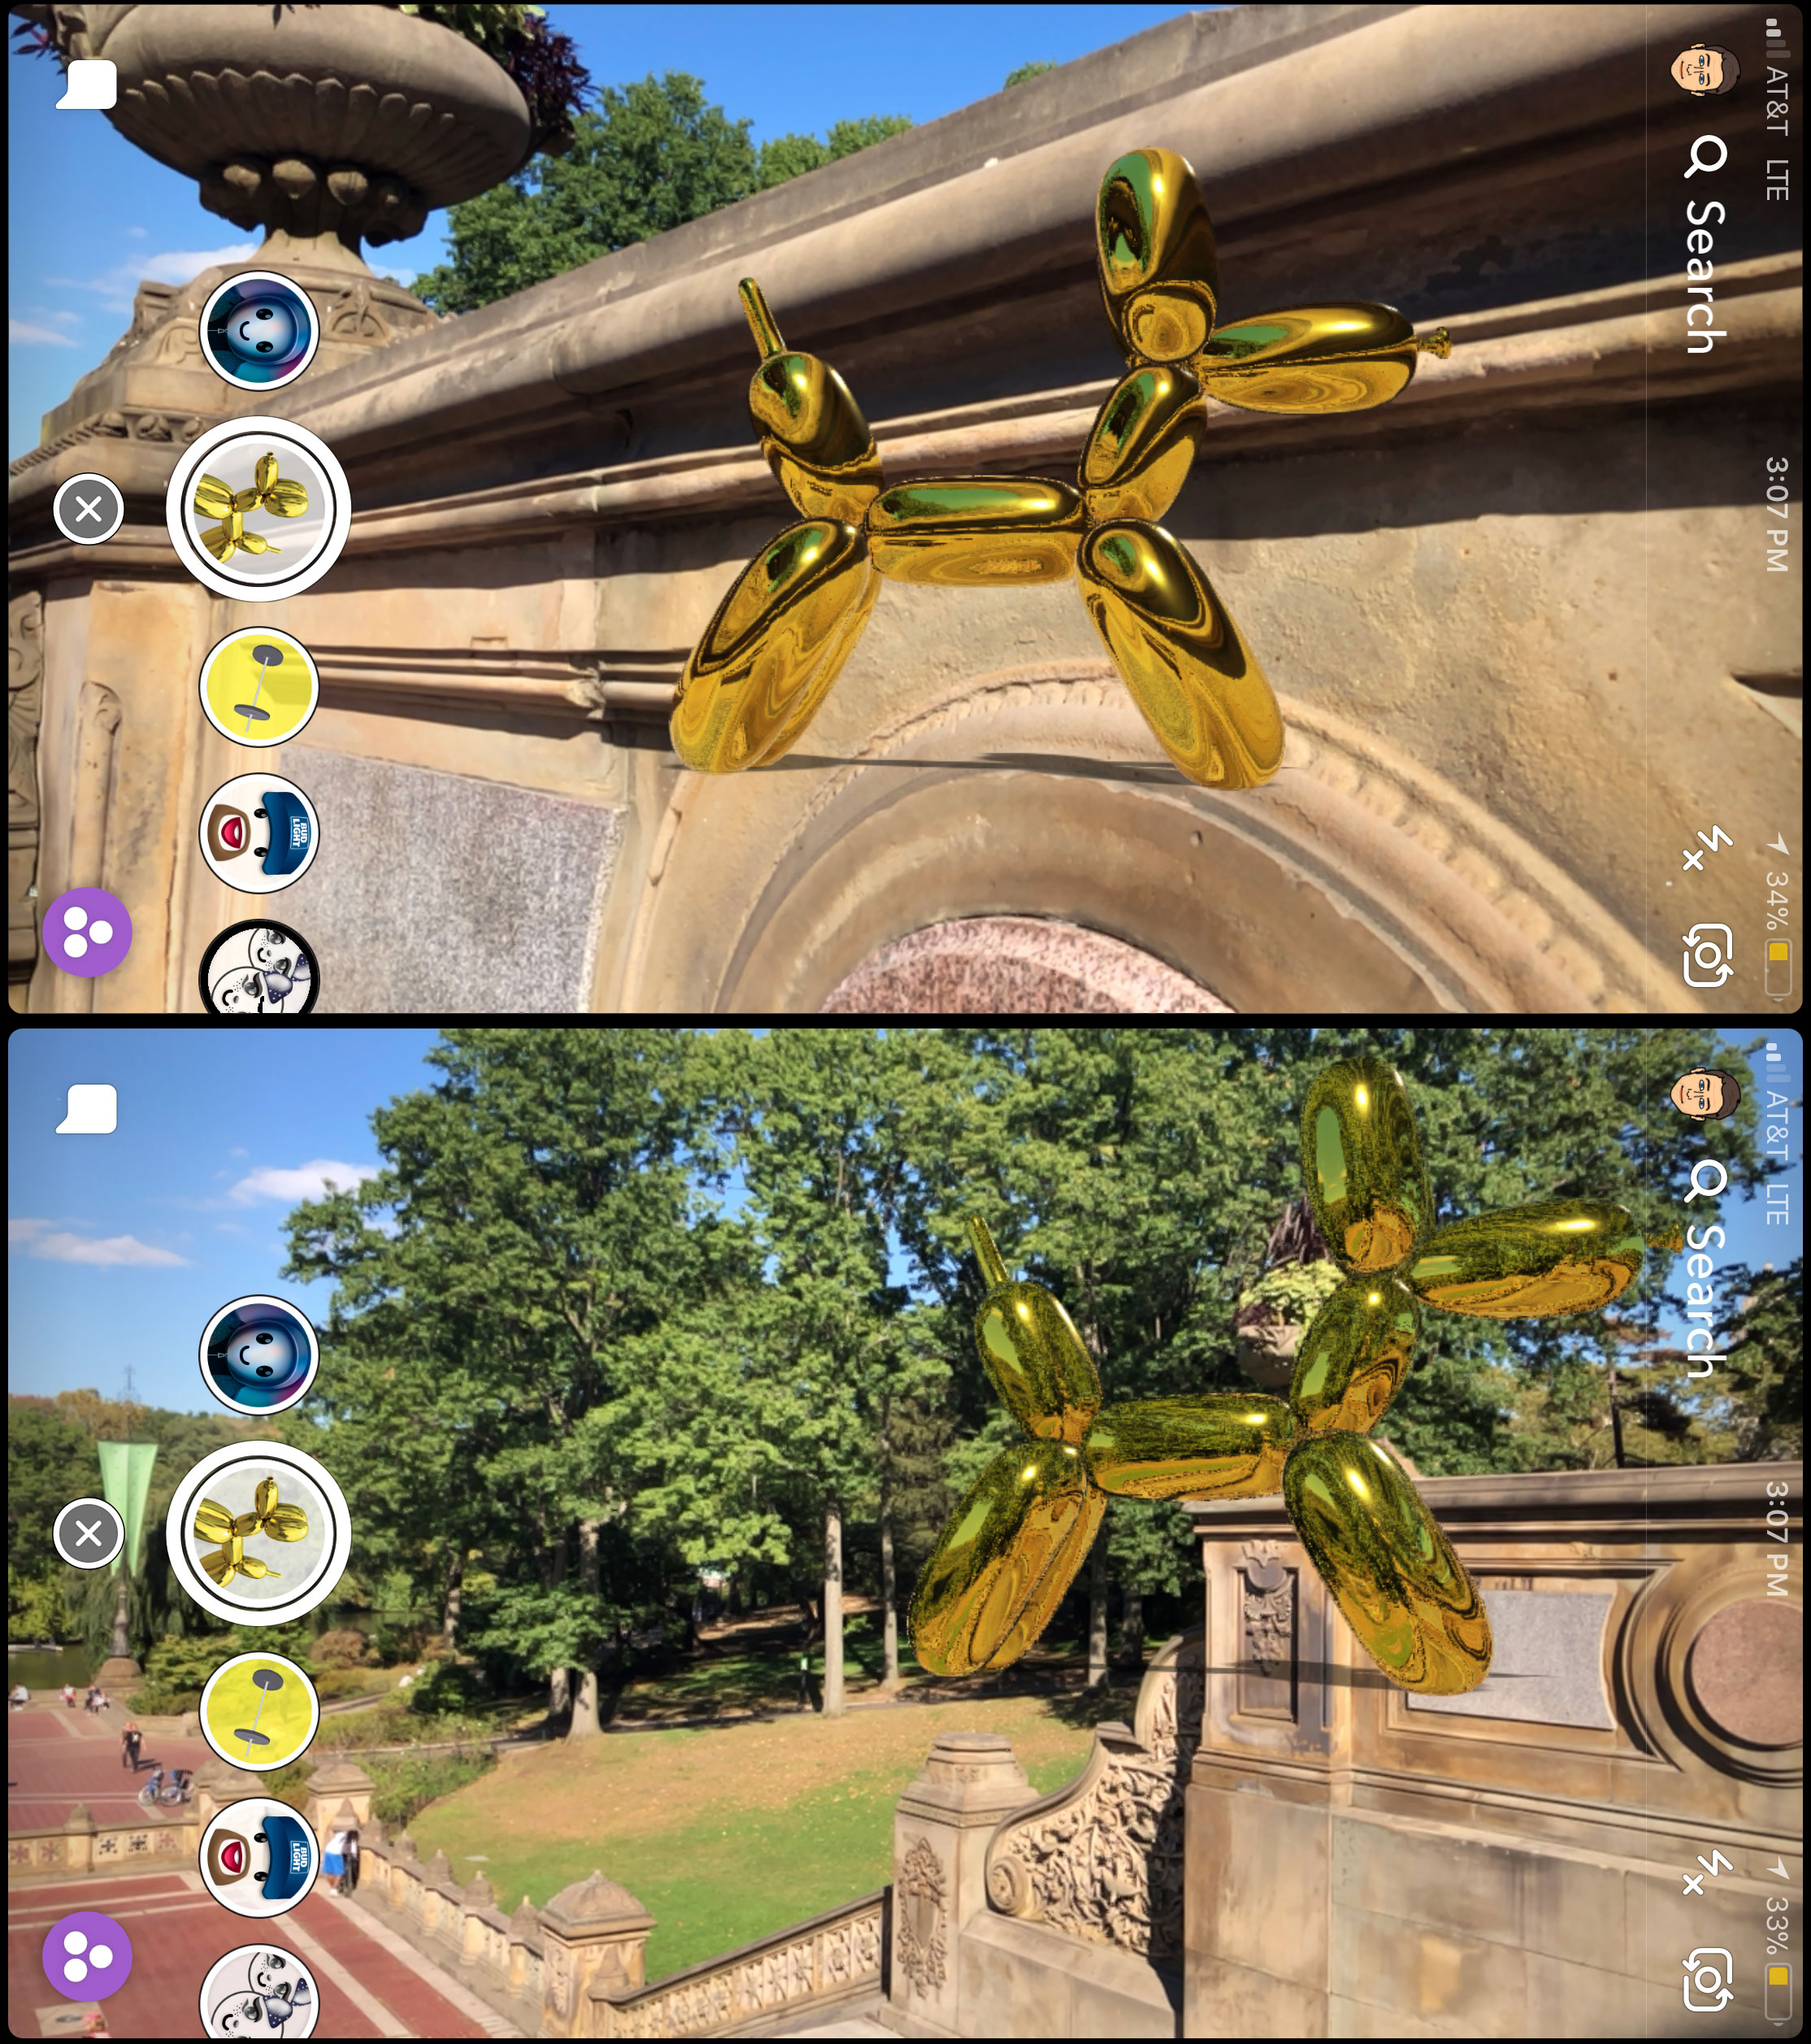 Hands-on with Snapchat’s mediocre, crashy AR art